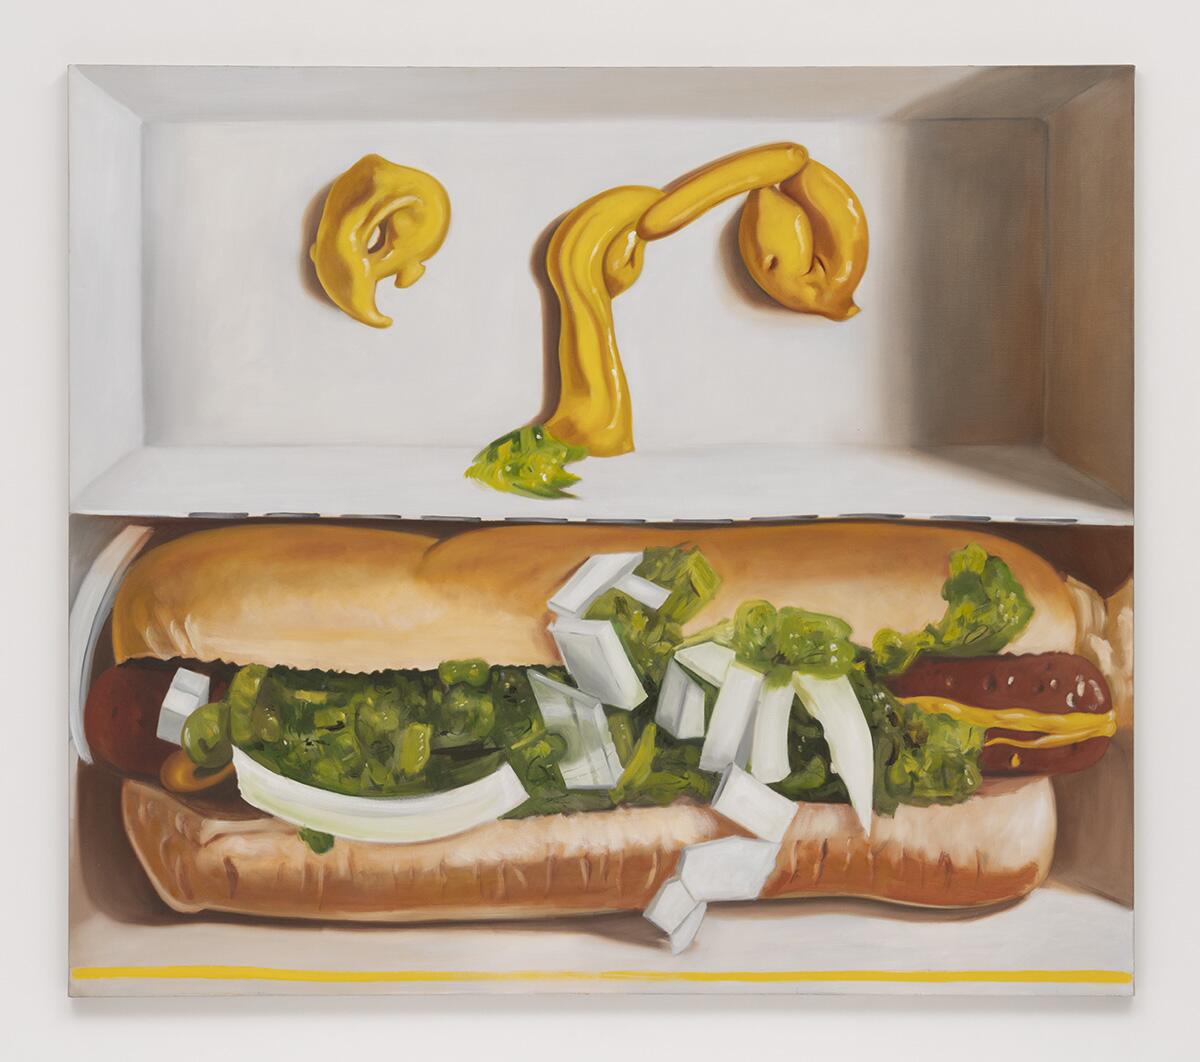 A painting shows a hot dog smothered in relish with eyes drawn in bright yellow mustard